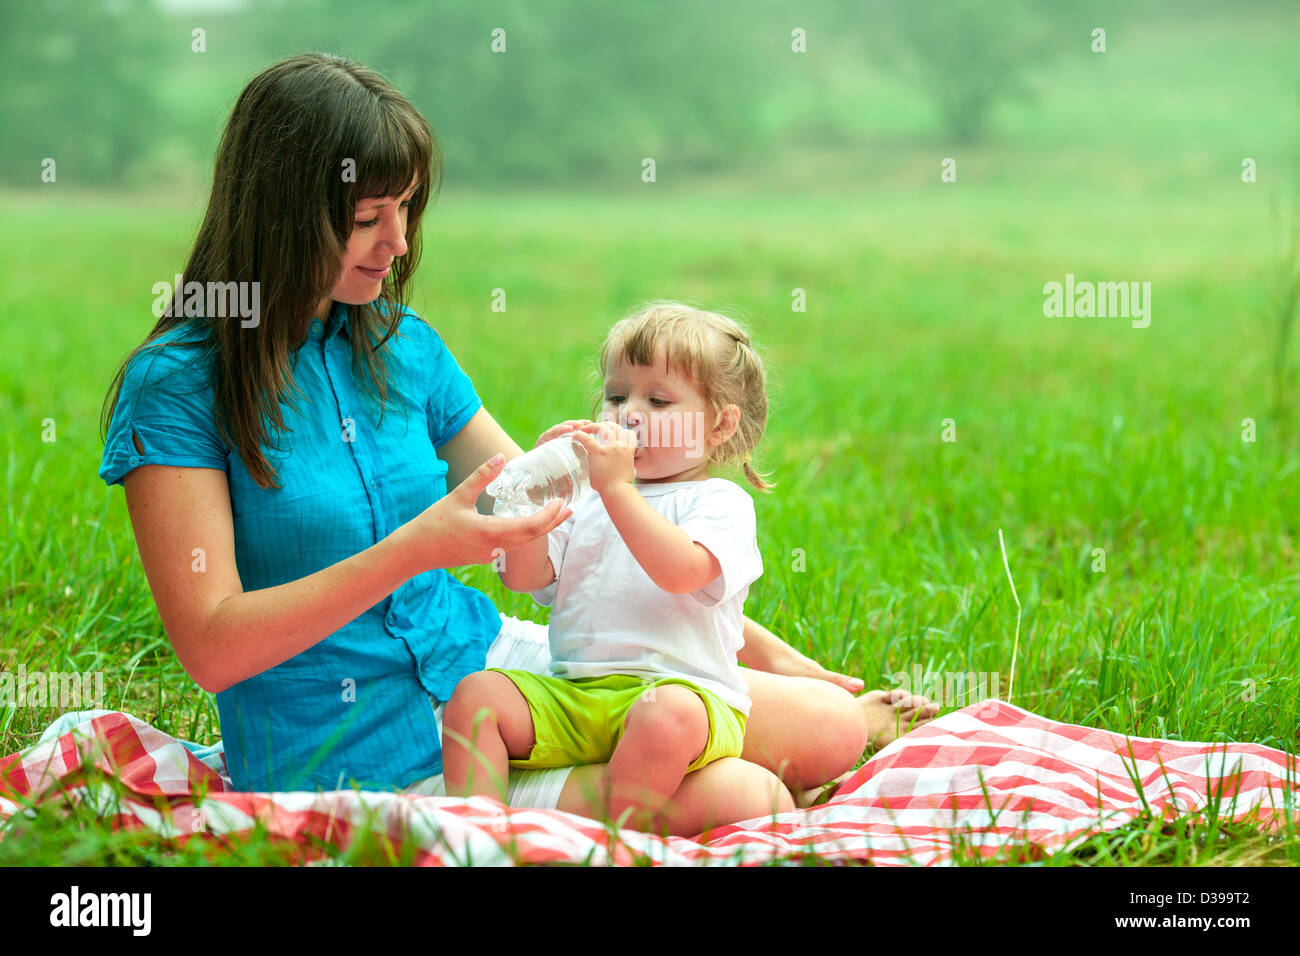 mother and daughter have picnic drinking water from bottle Stock Photo